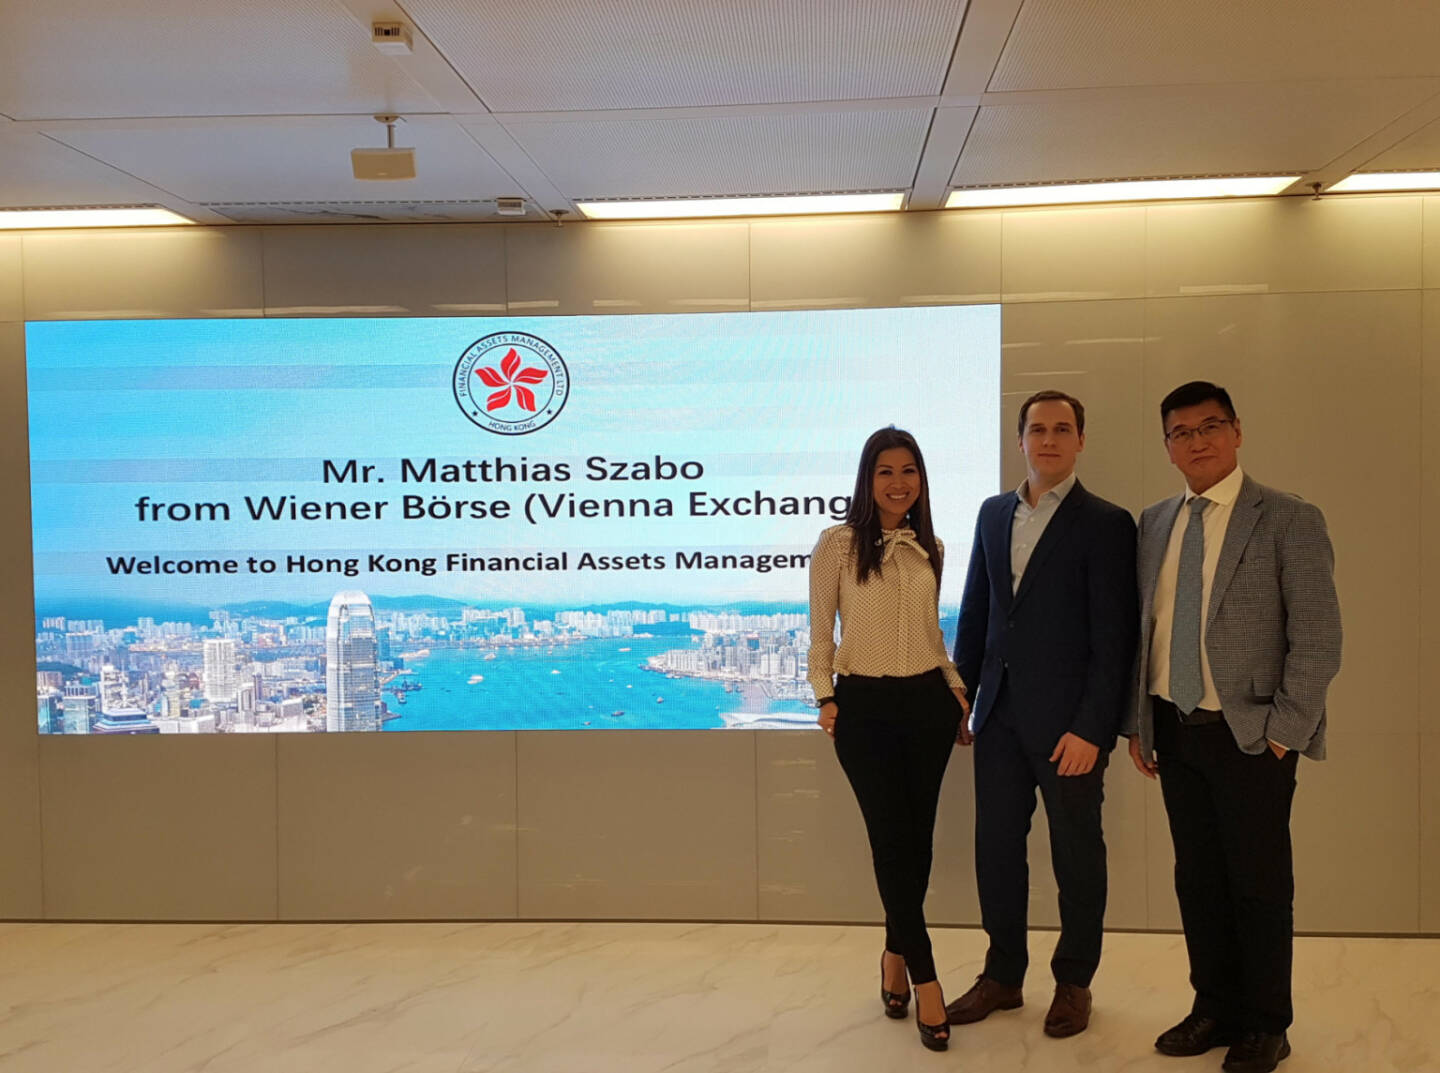 Matthias Szabo , Wiener Börse : Had a great time yesterday with the guys from Hong Kong Financial Assets Management. Very promising company with a clear vision for Chinese companies looking to enter international capital markets. Thanks Inez Chow and Stephen Lee for the warm welcome and interesting discussion!